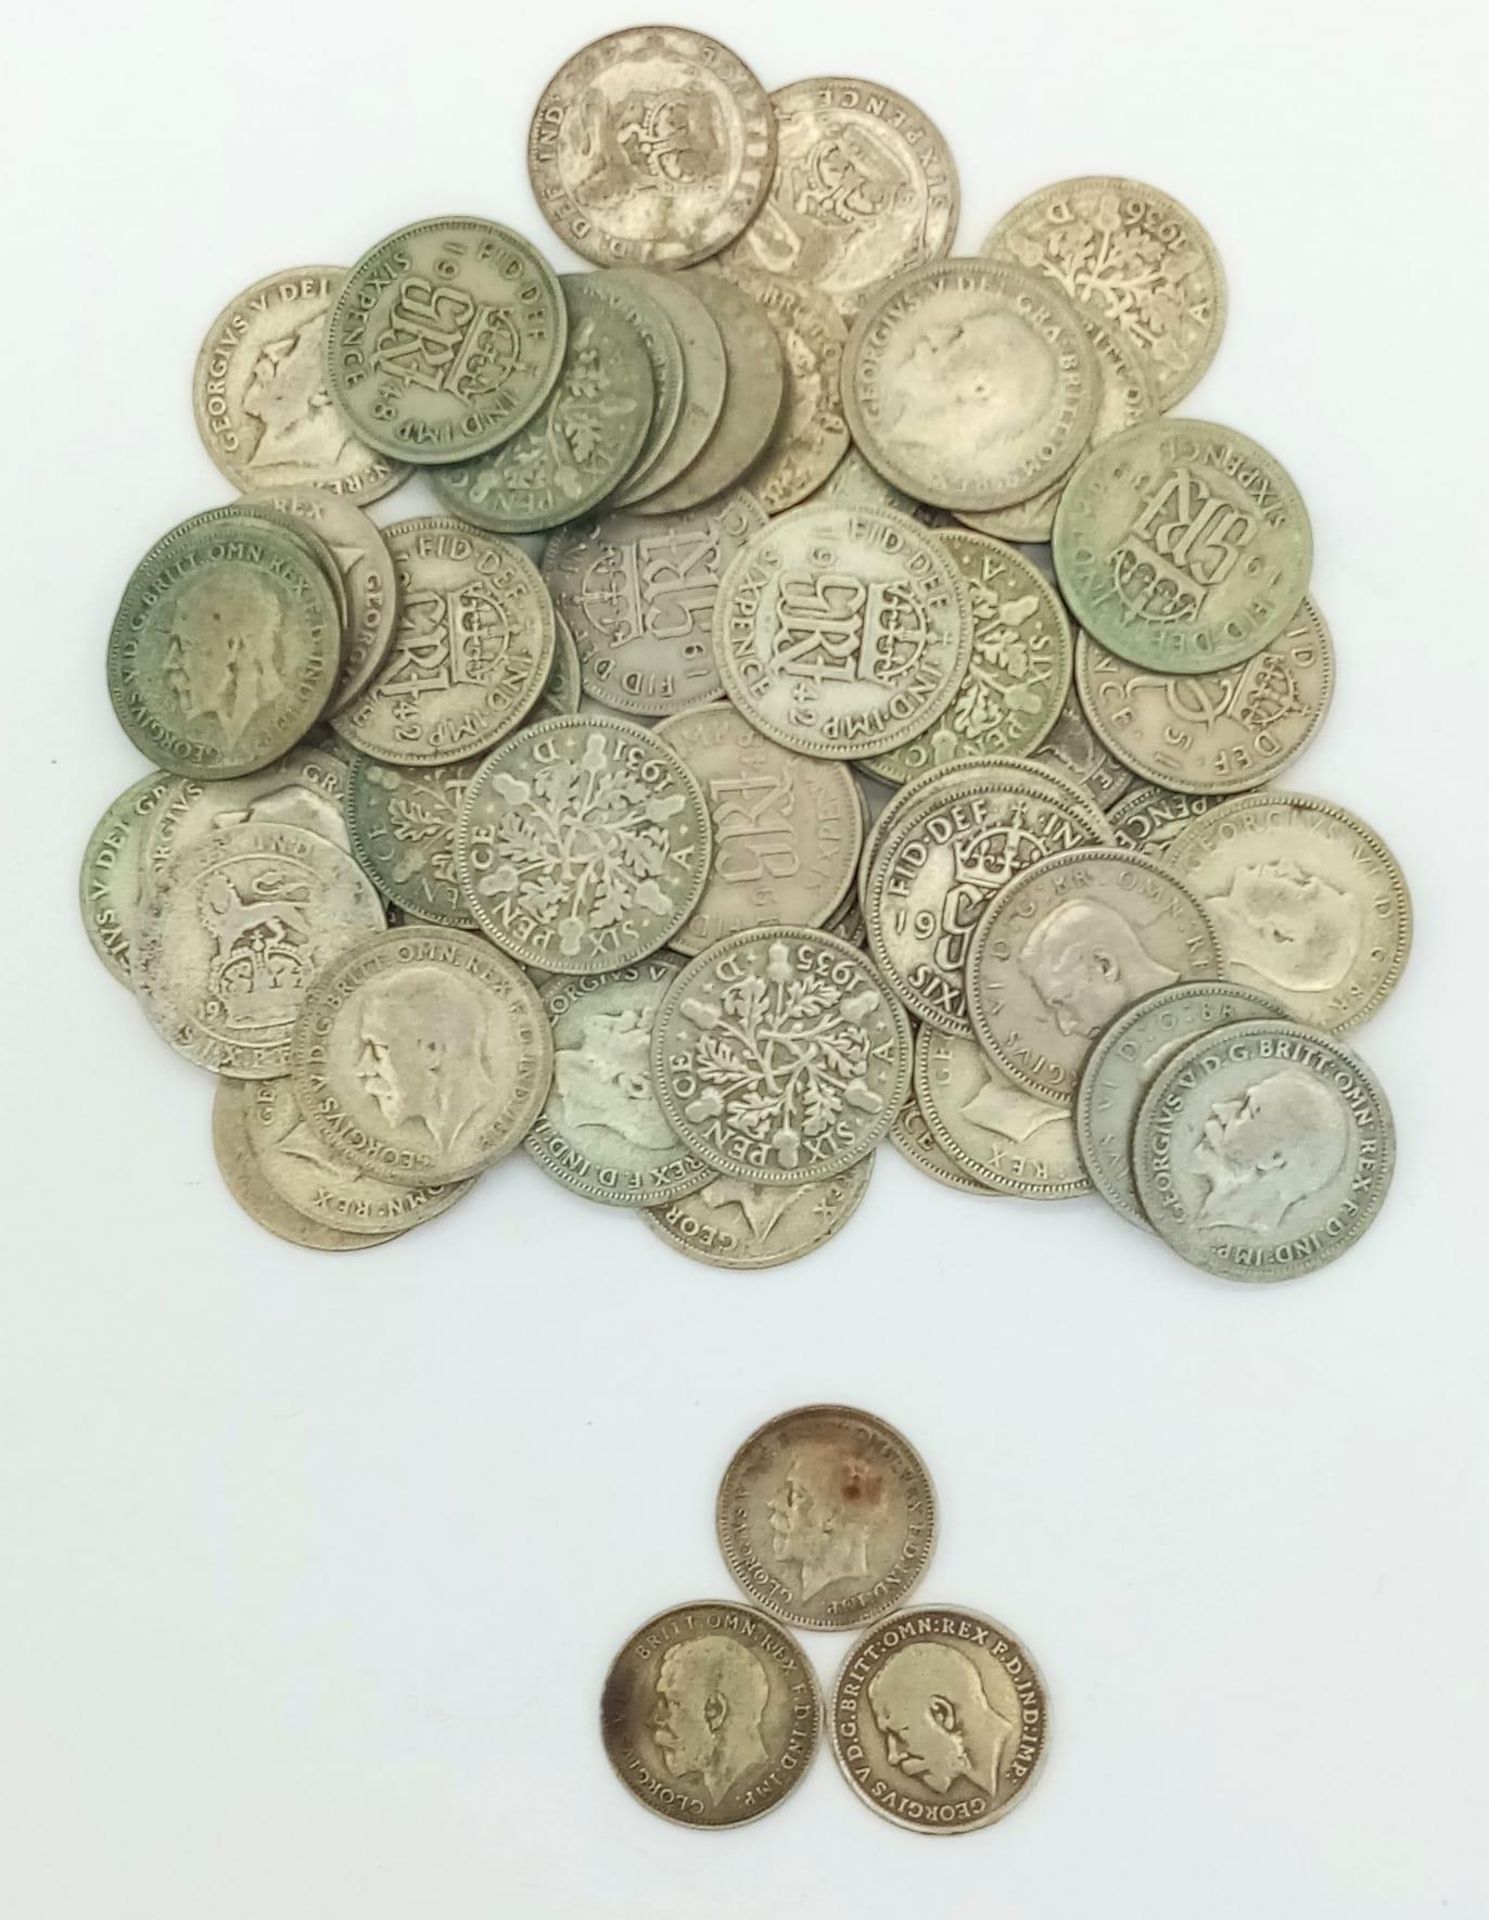 A Collection of 54 Pre 1947 British Silver Sixpence Coins plus Three Silver Threepence coins. - Image 2 of 3